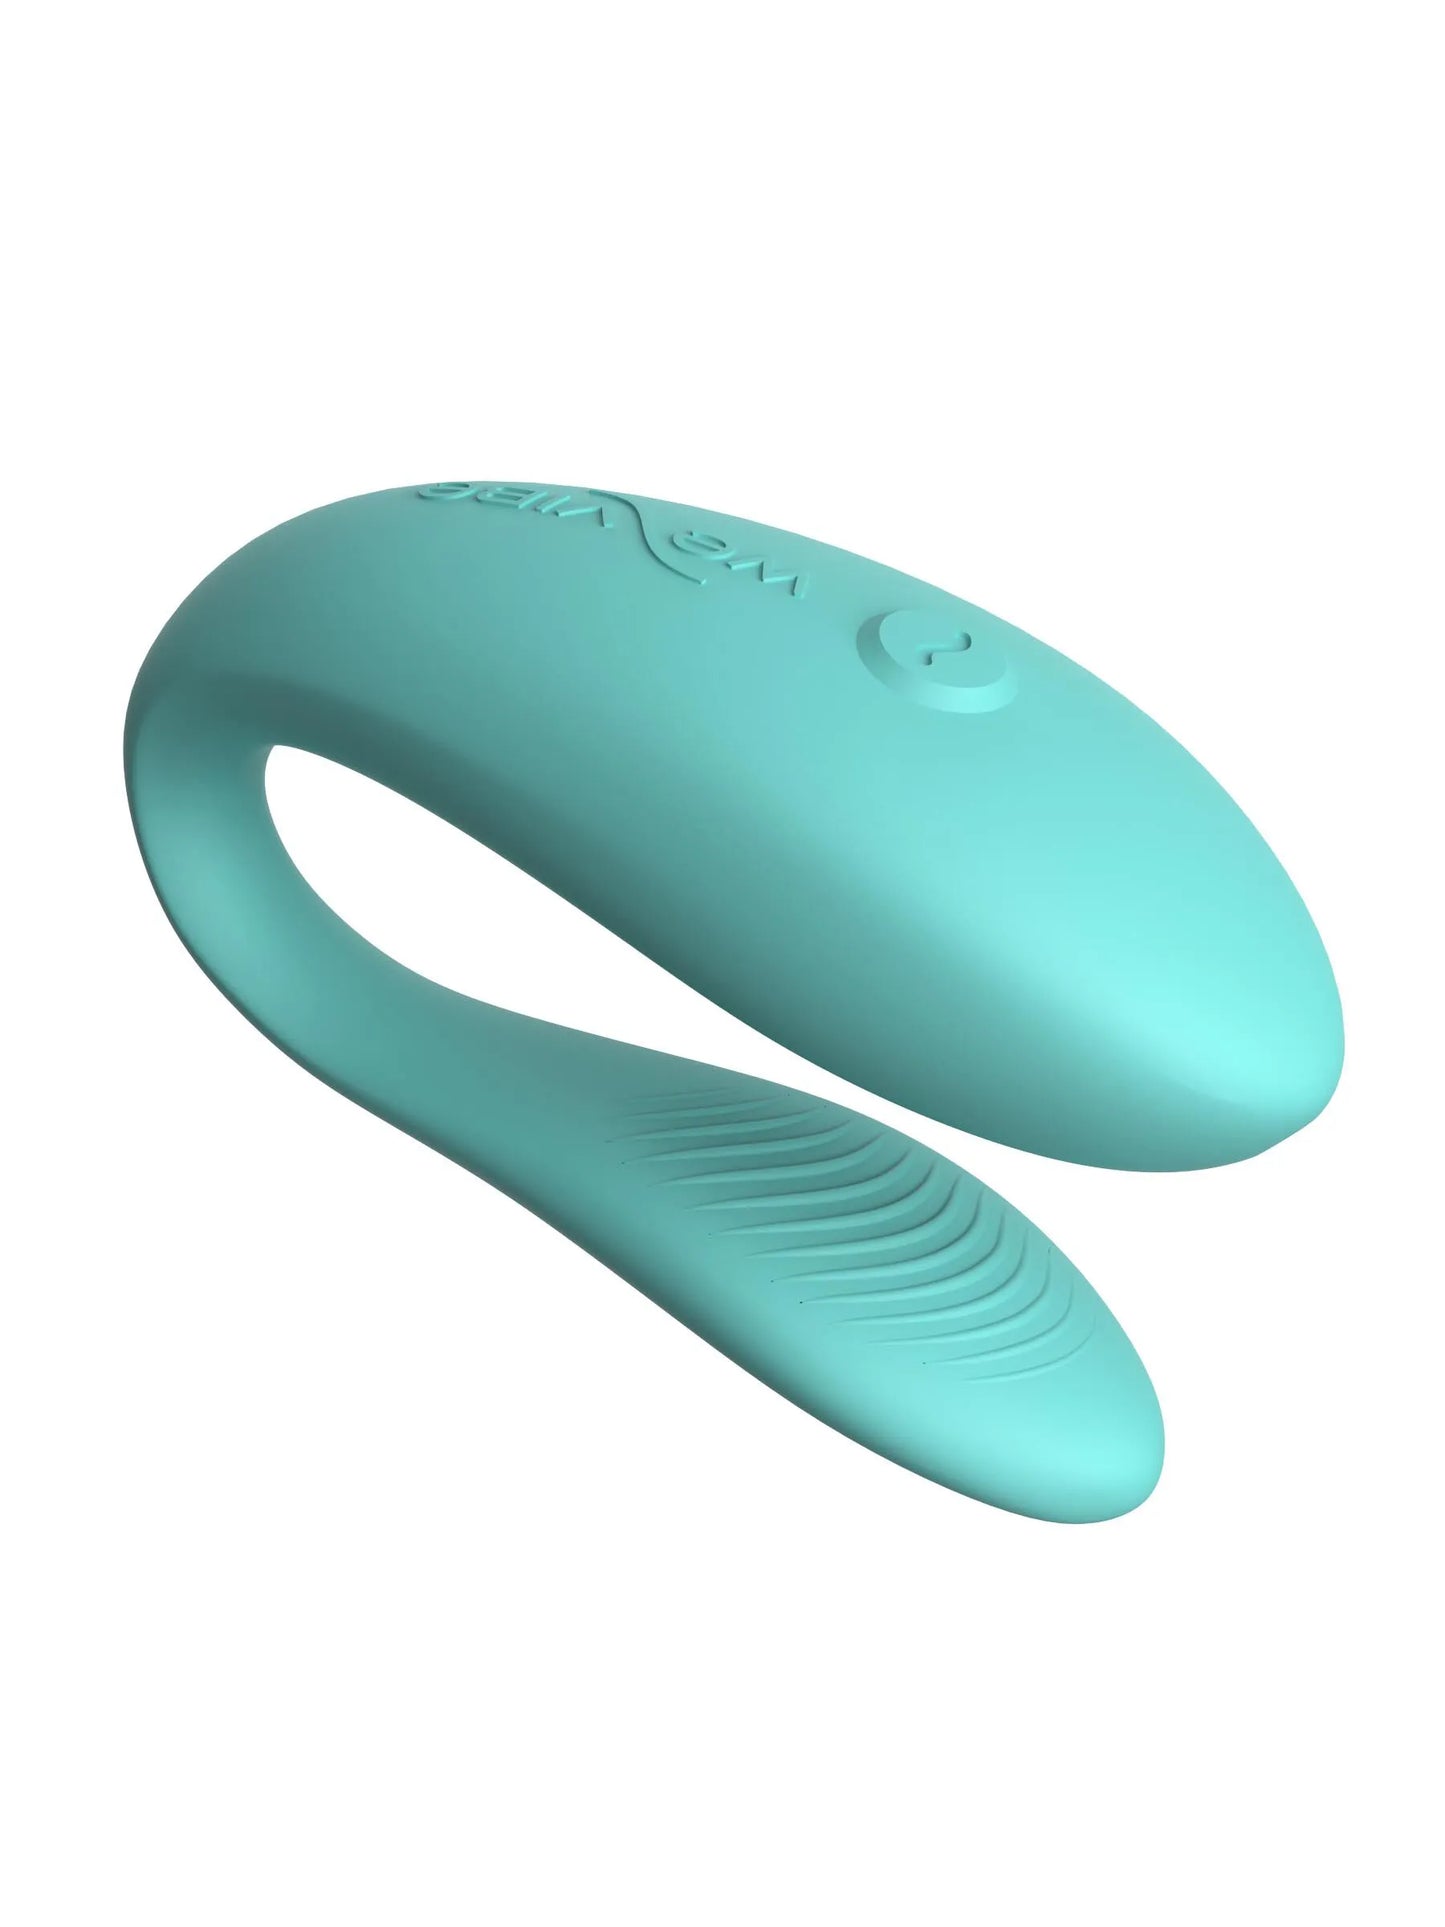 We Vibe Sync Lite Couples Vibrator From Ann Summers, Image 0